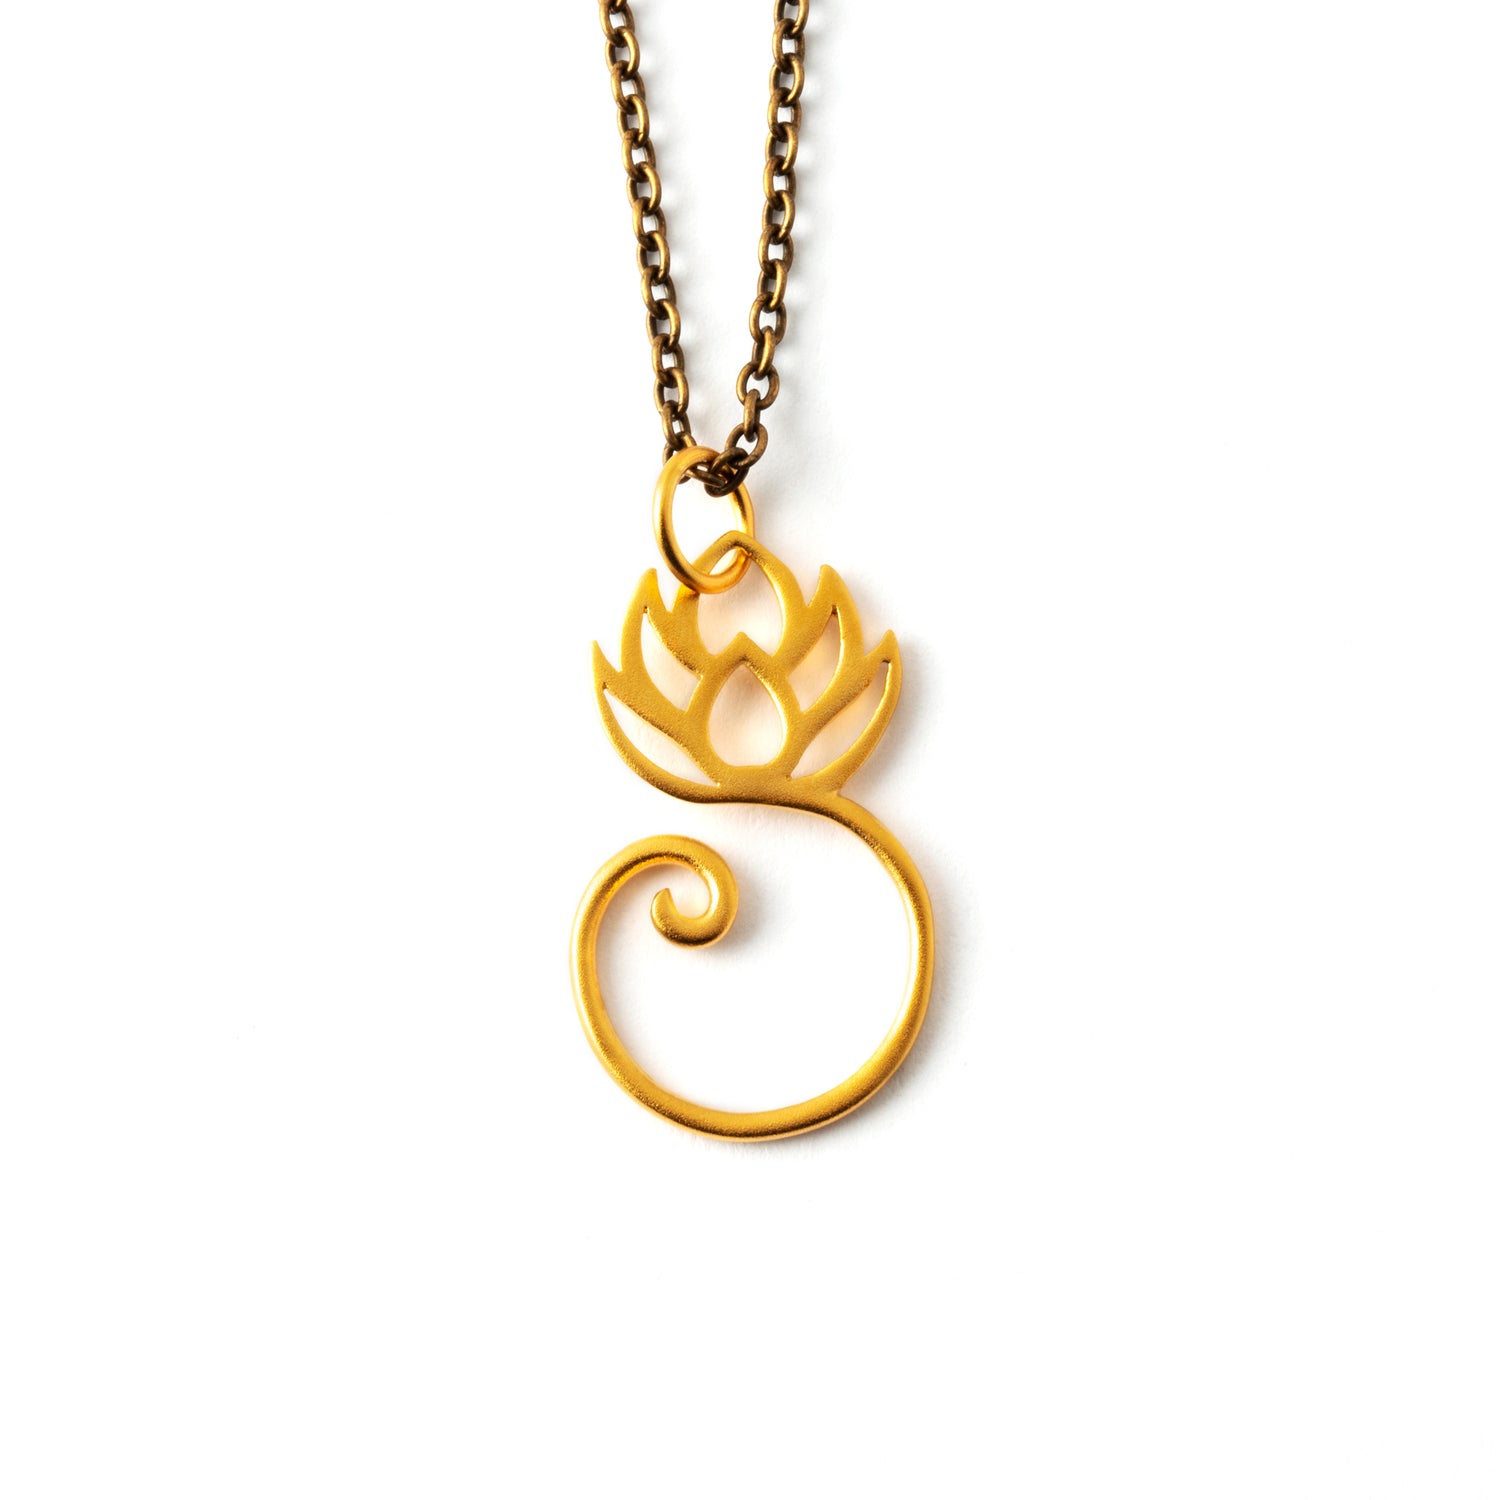 Spiralling Gold Lotus Charm necklace frontal view